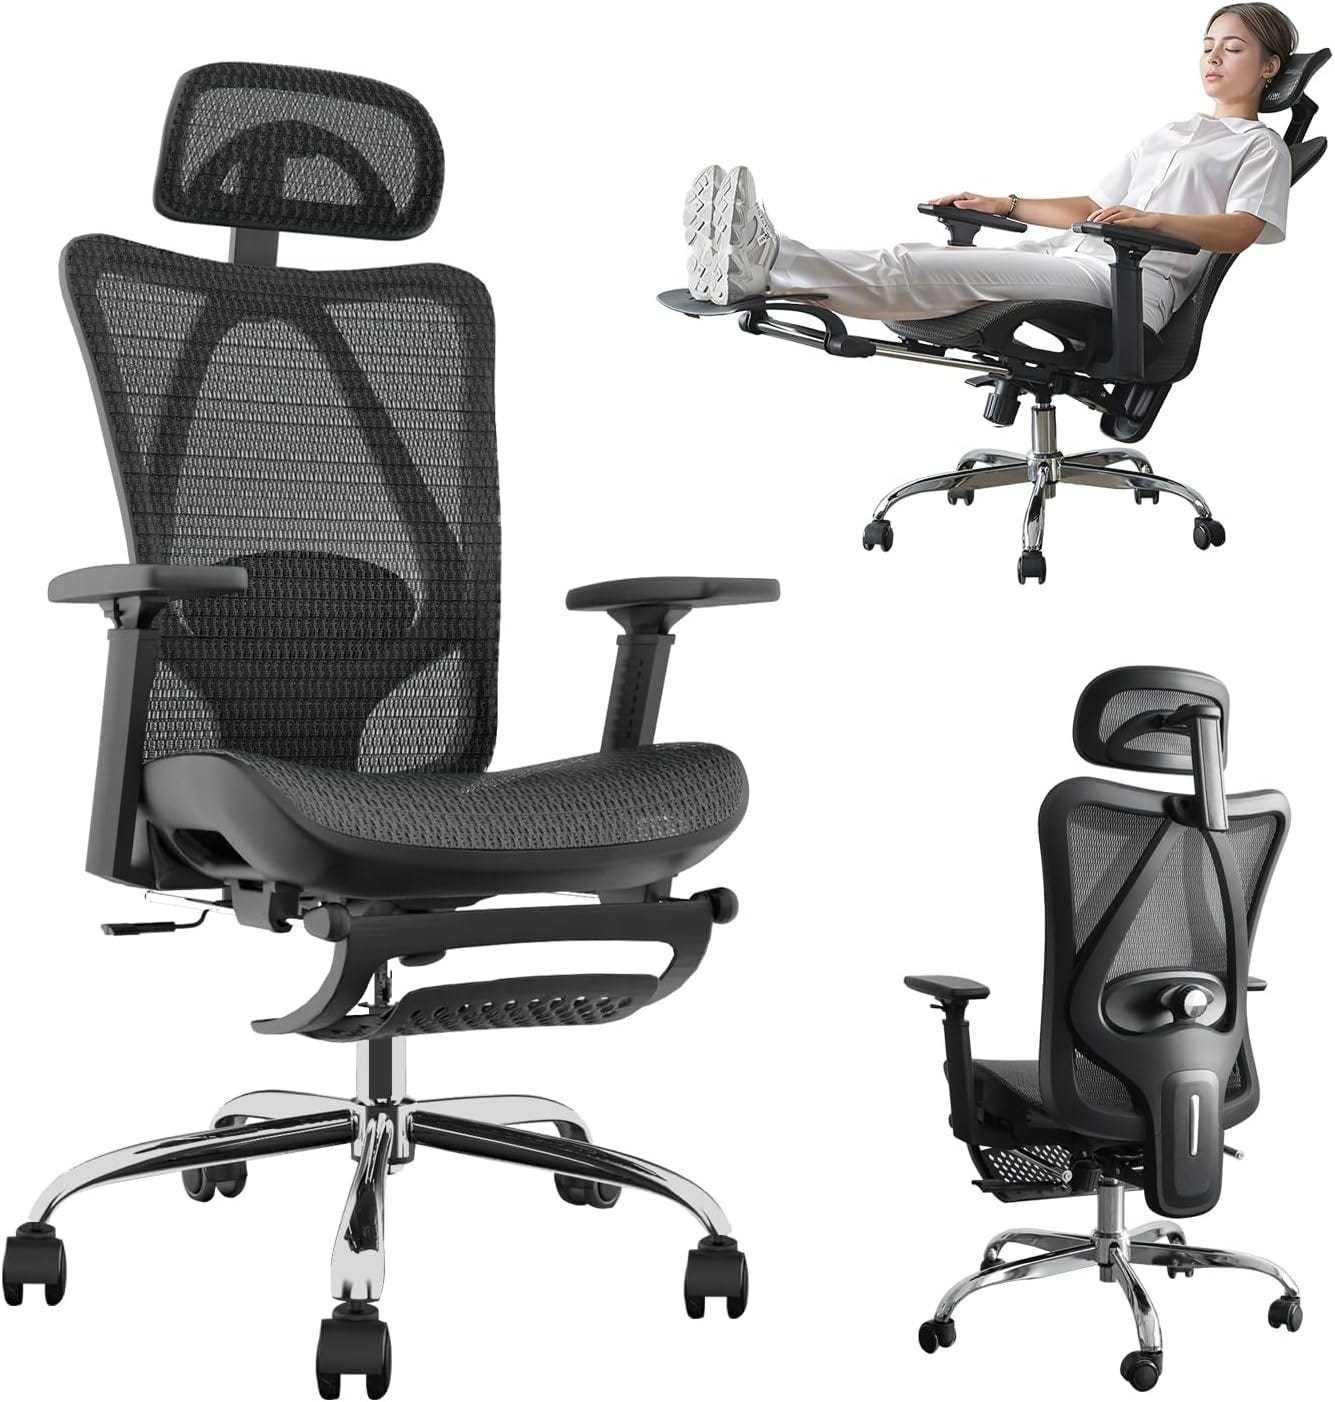 Ergonomic Office Chair, SGS Certified Gas Cylinder, Home Office Furniture Sets,Office Chair with Adjustable Lumbar Support and Seat Depth, Retractable Footrest, Mesh Office Chair Gaming Chair